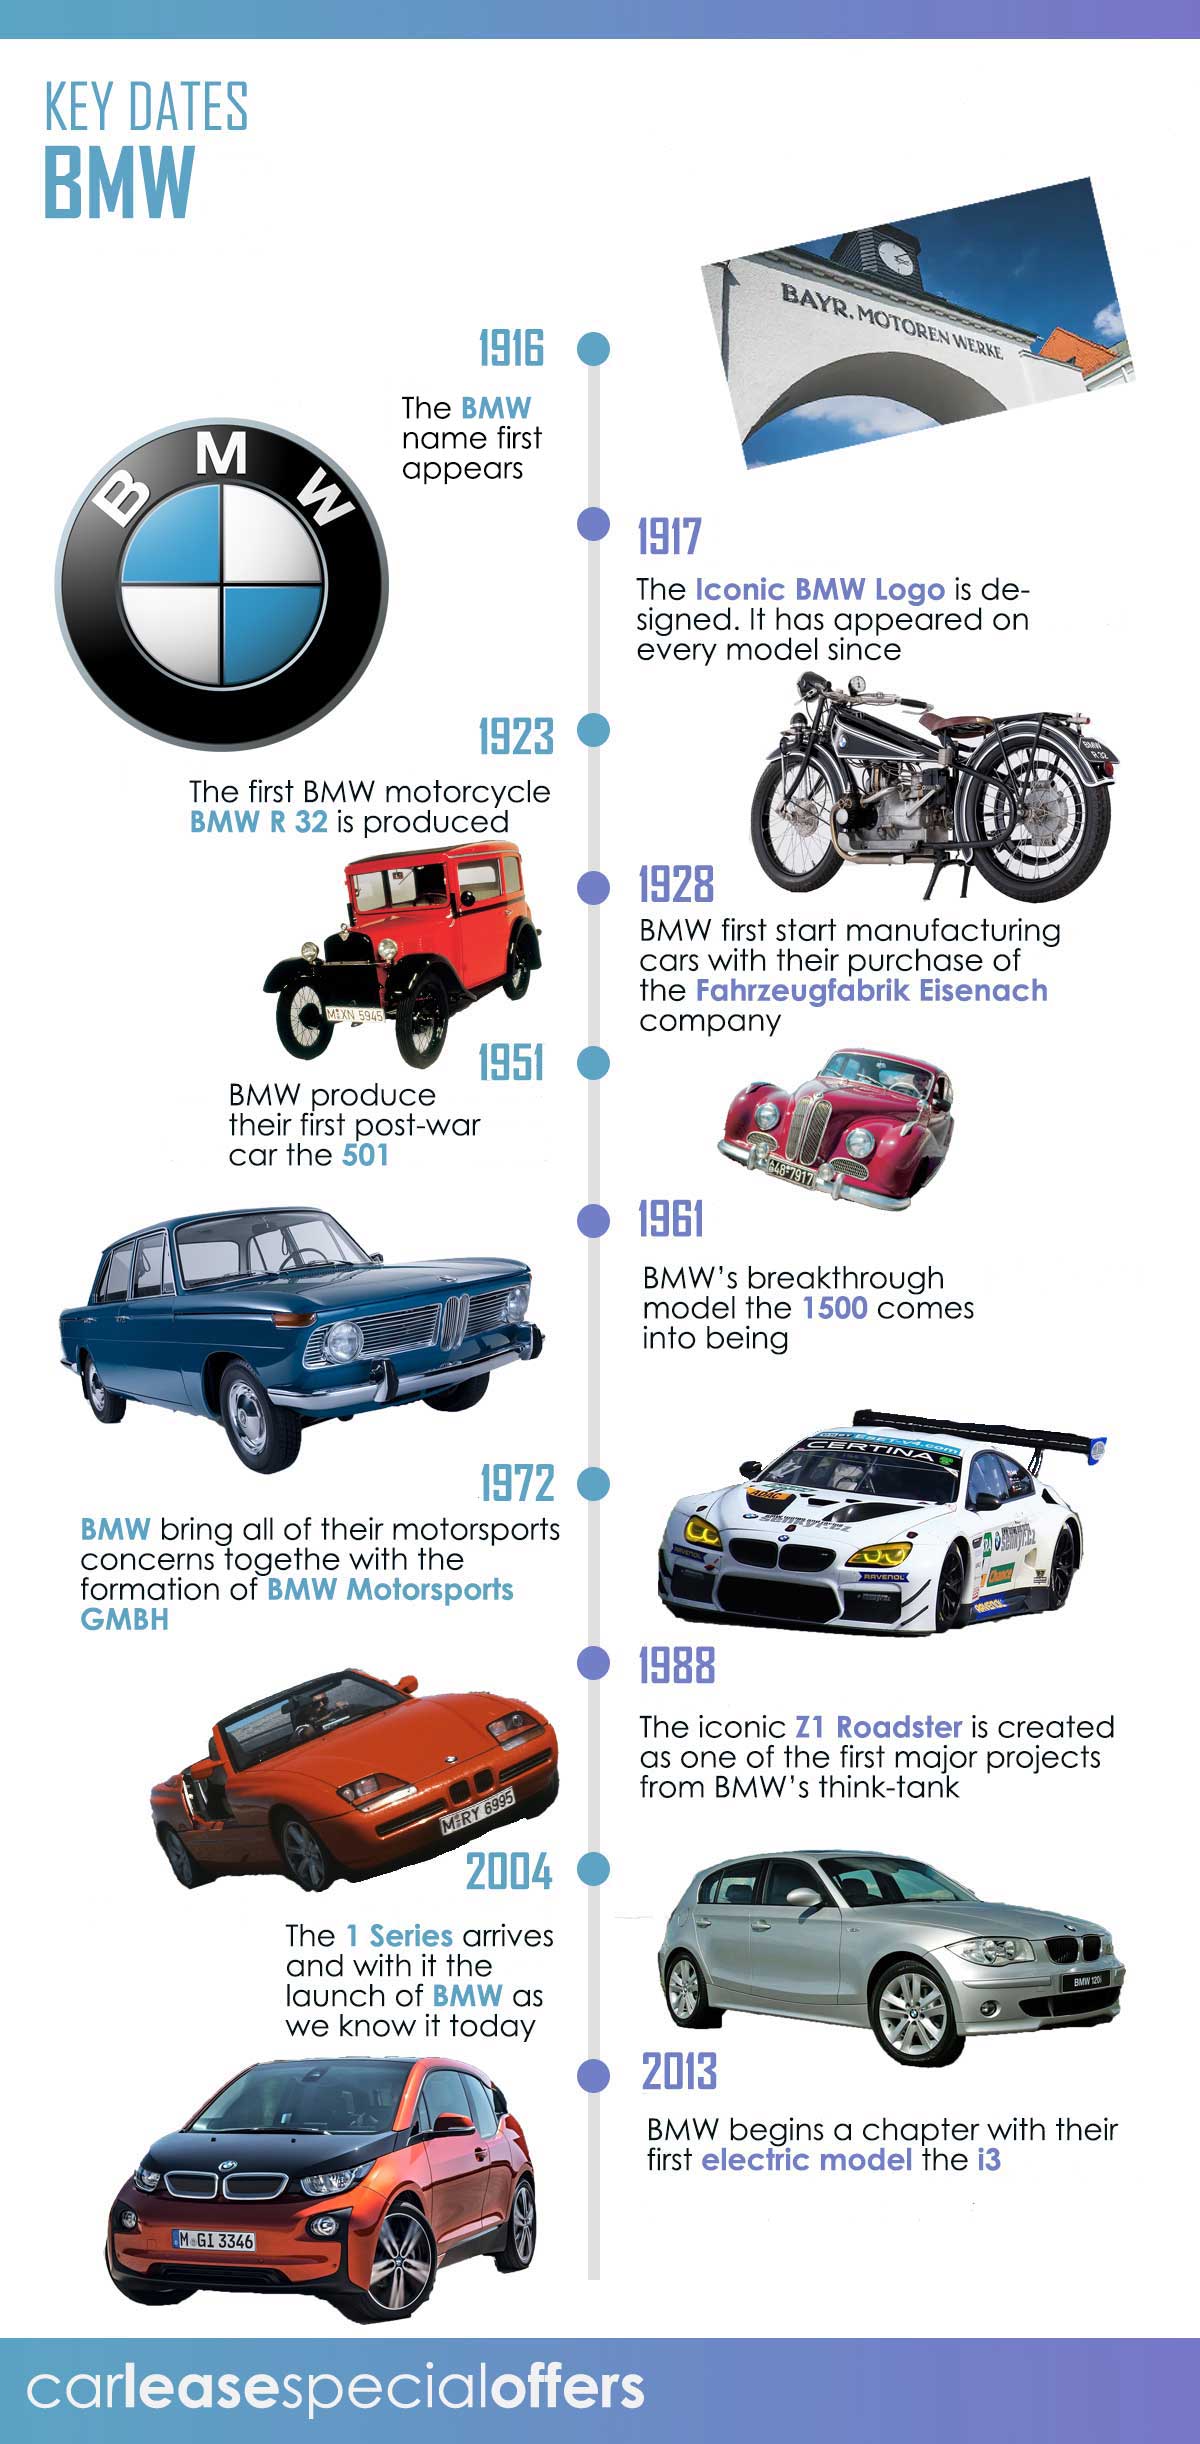 BMW Logo Design – History, Meaning and Evolution